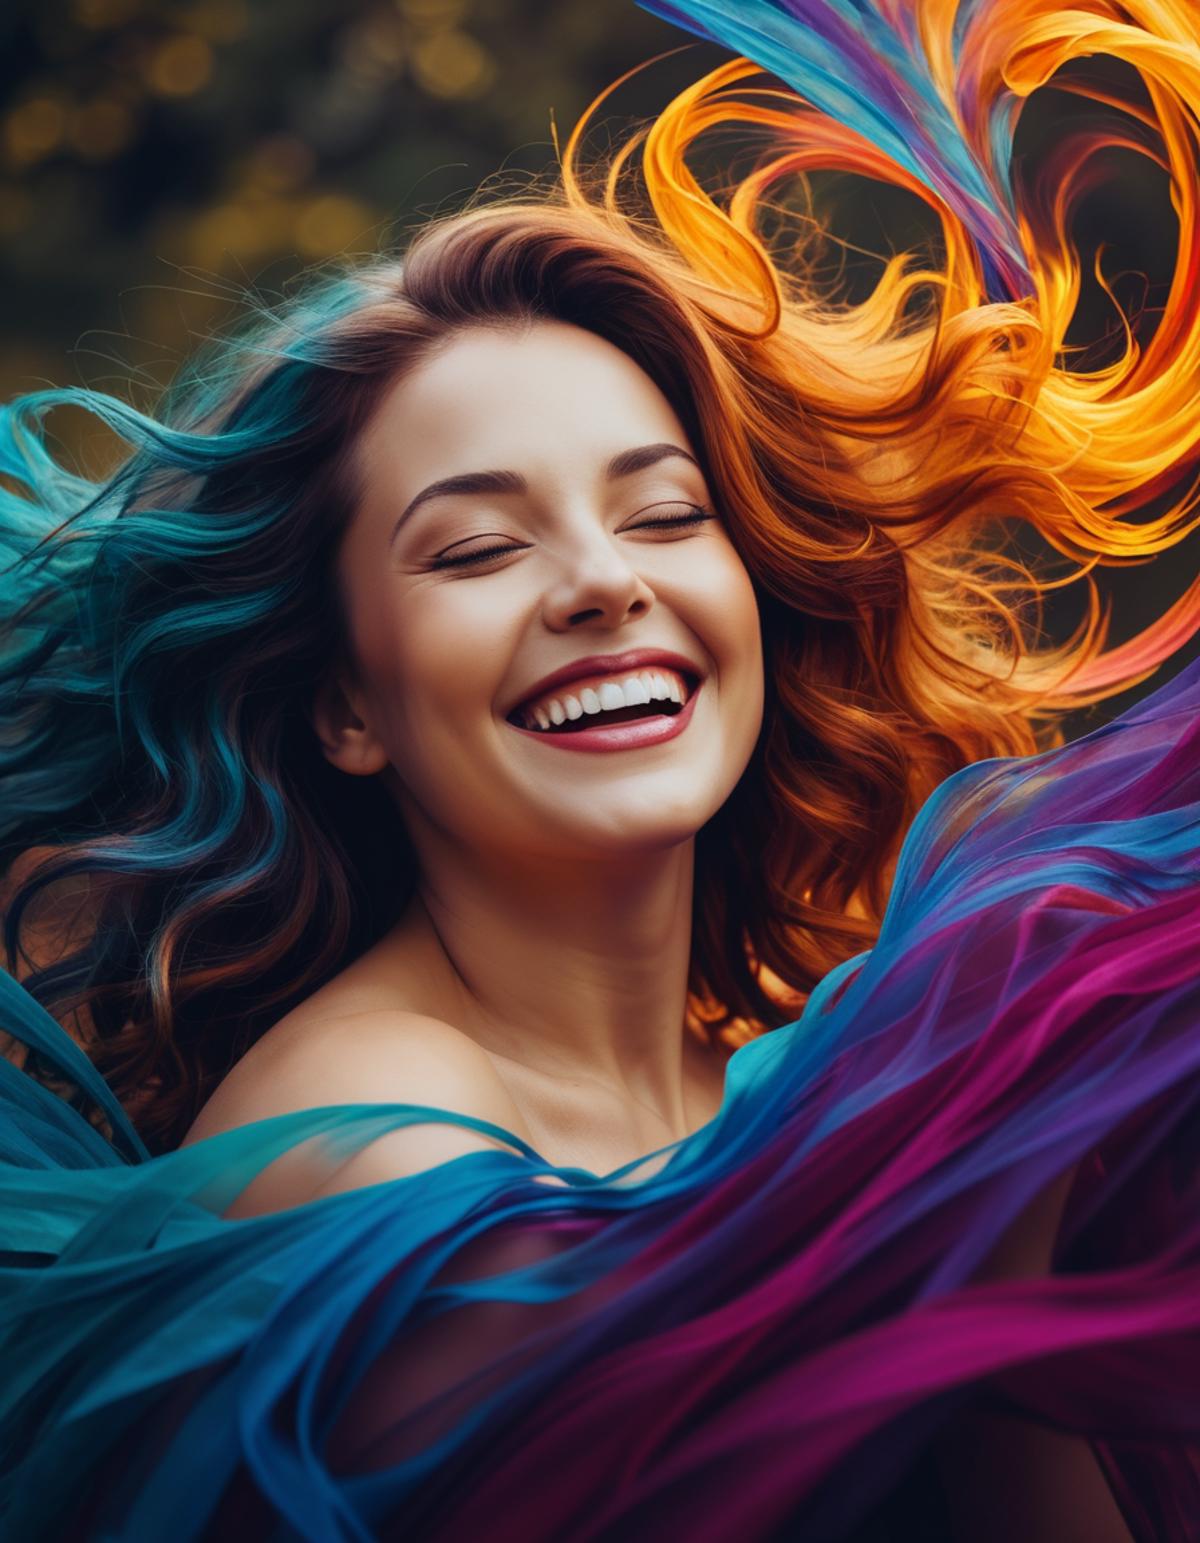 Woman with colorful hair smiling and laughing while looking up.